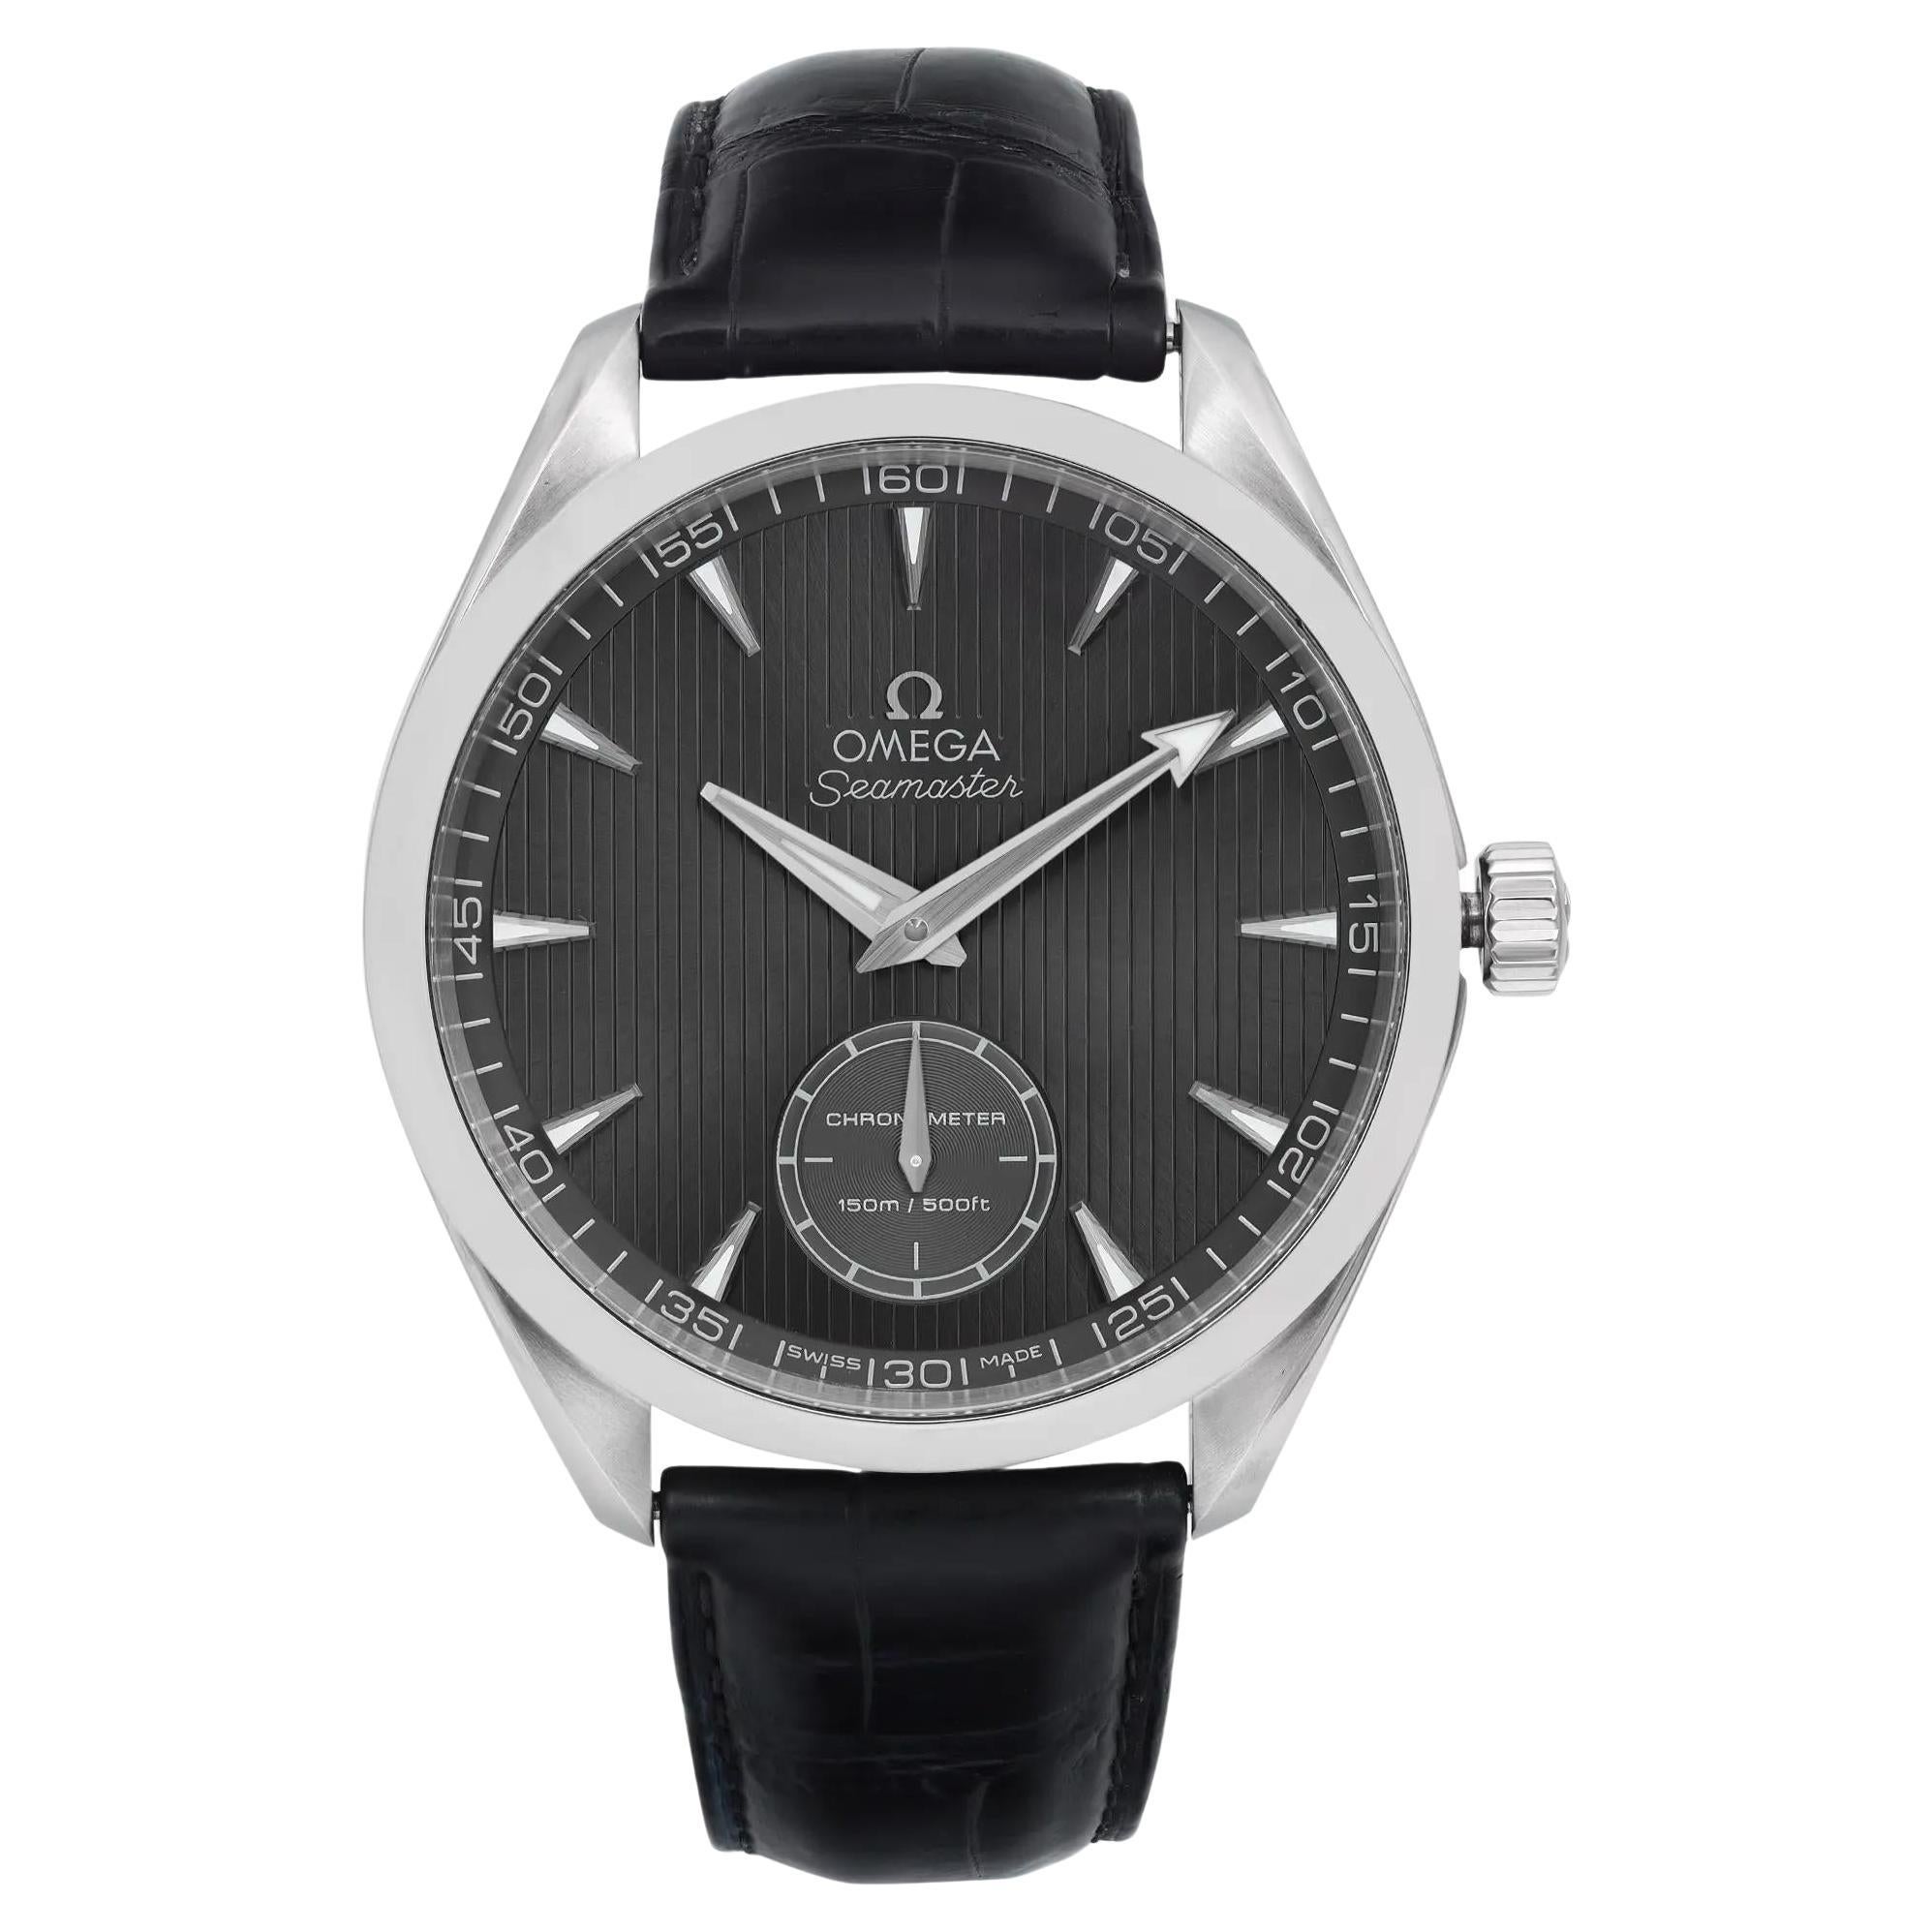 Is the Omega Railmaster discontinued?